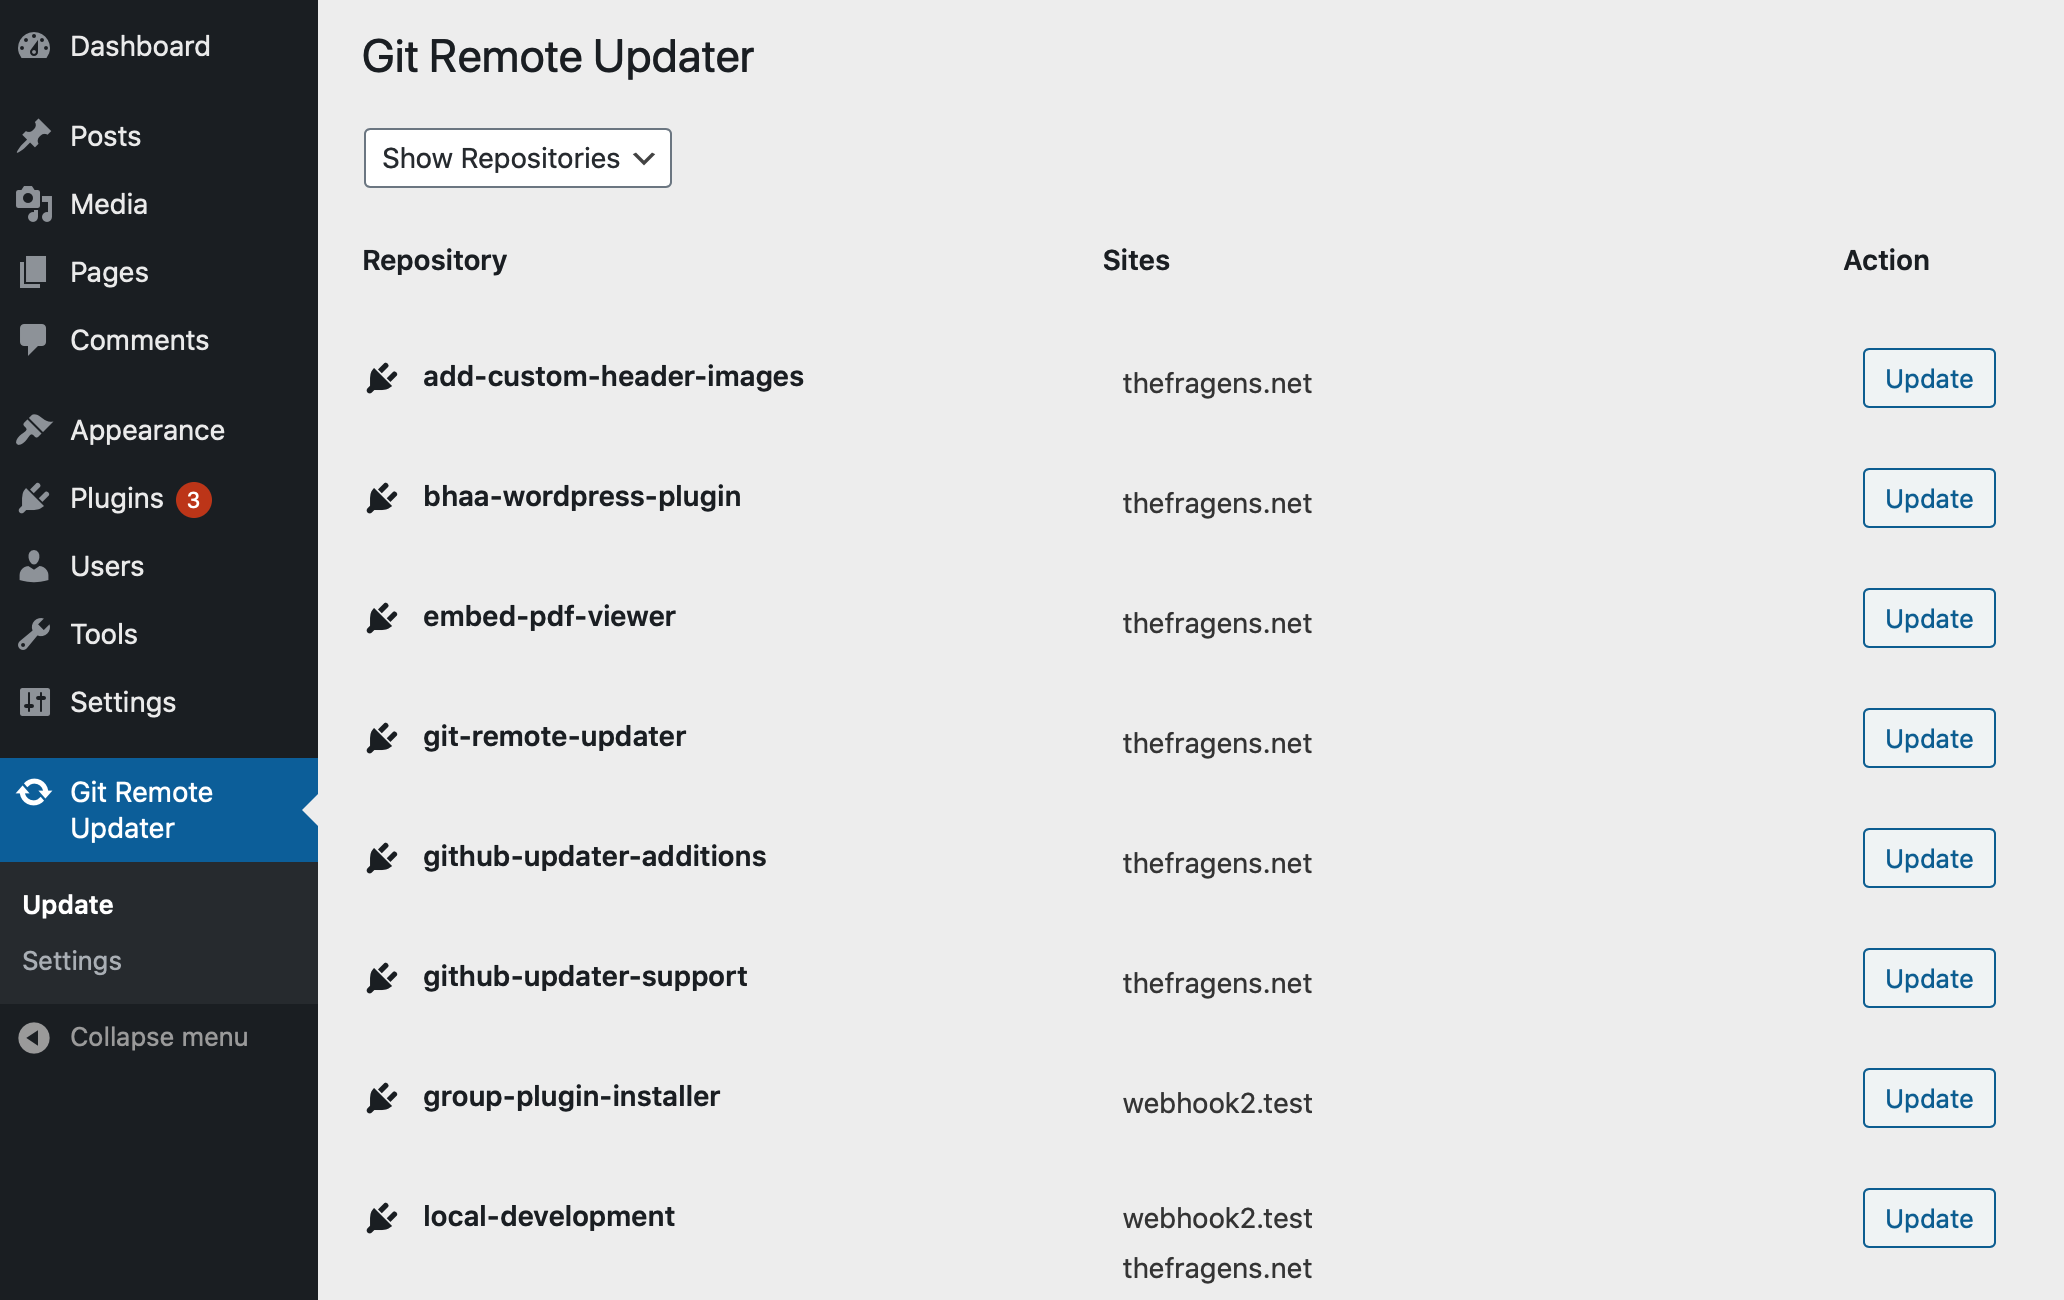 Git Remote Updater by Repository